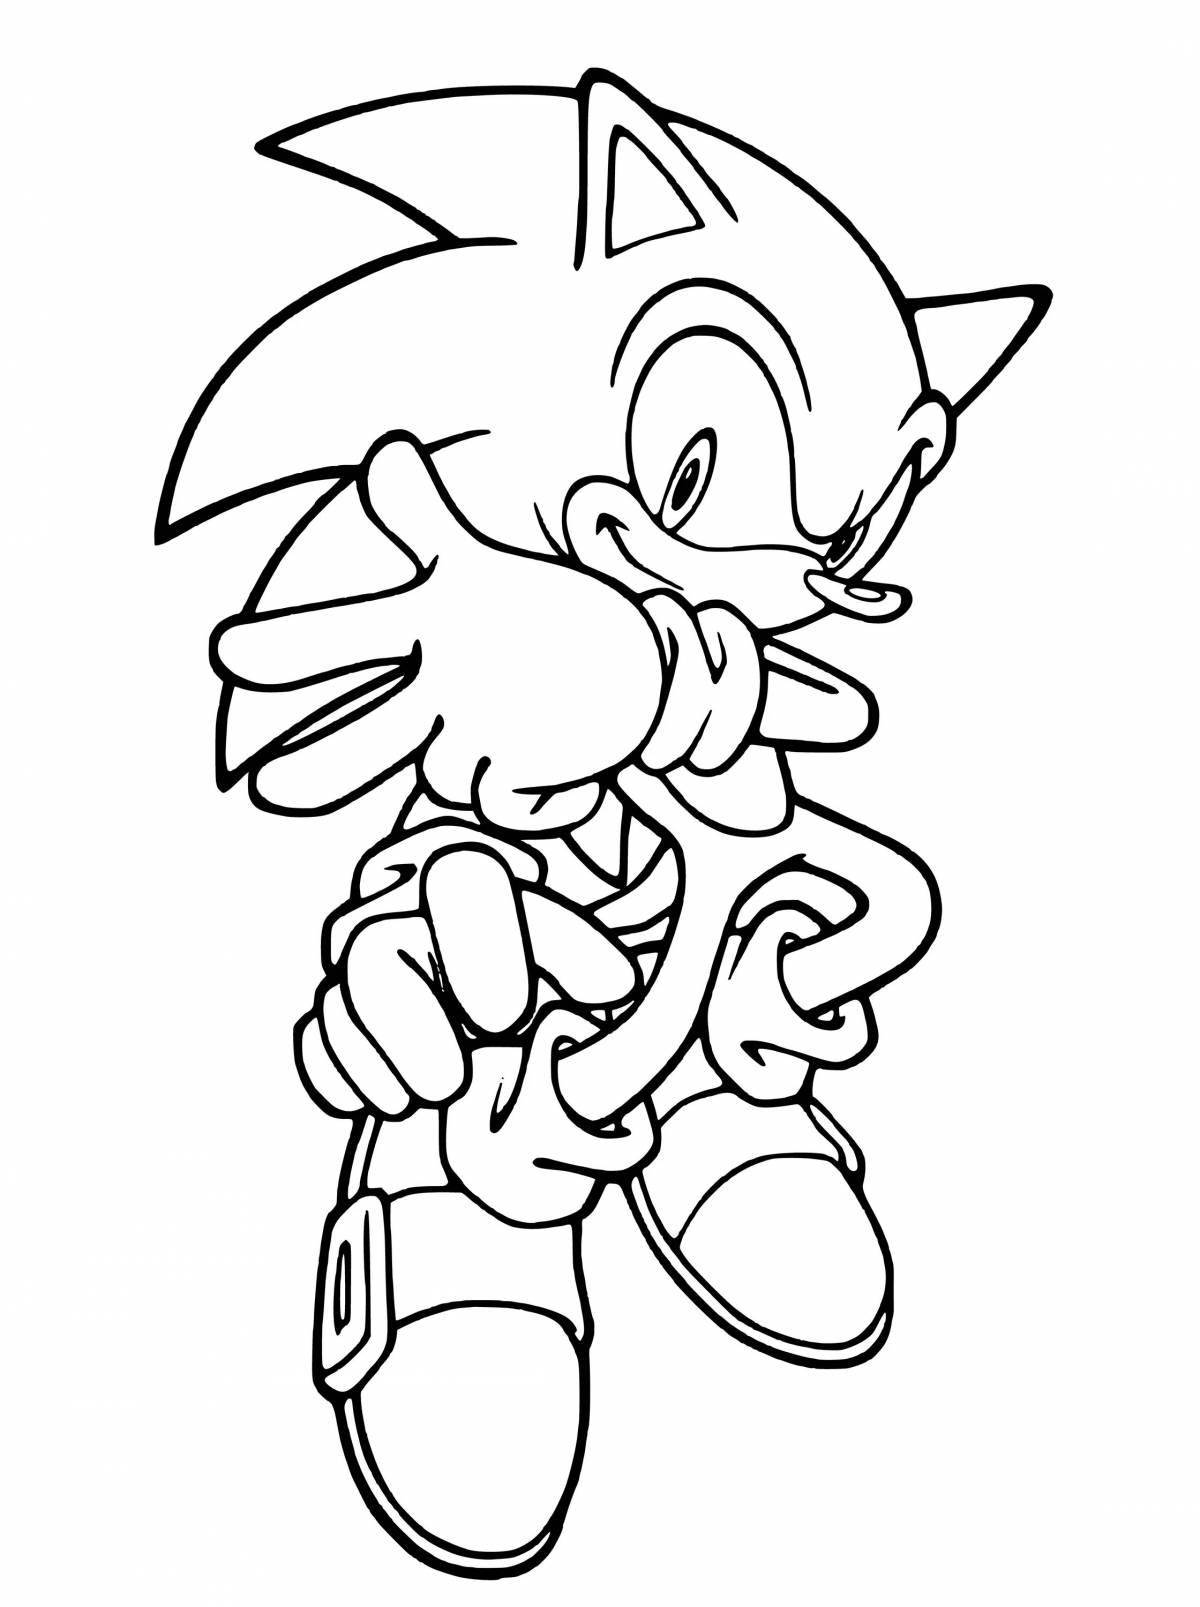 Regal sonic coloring page